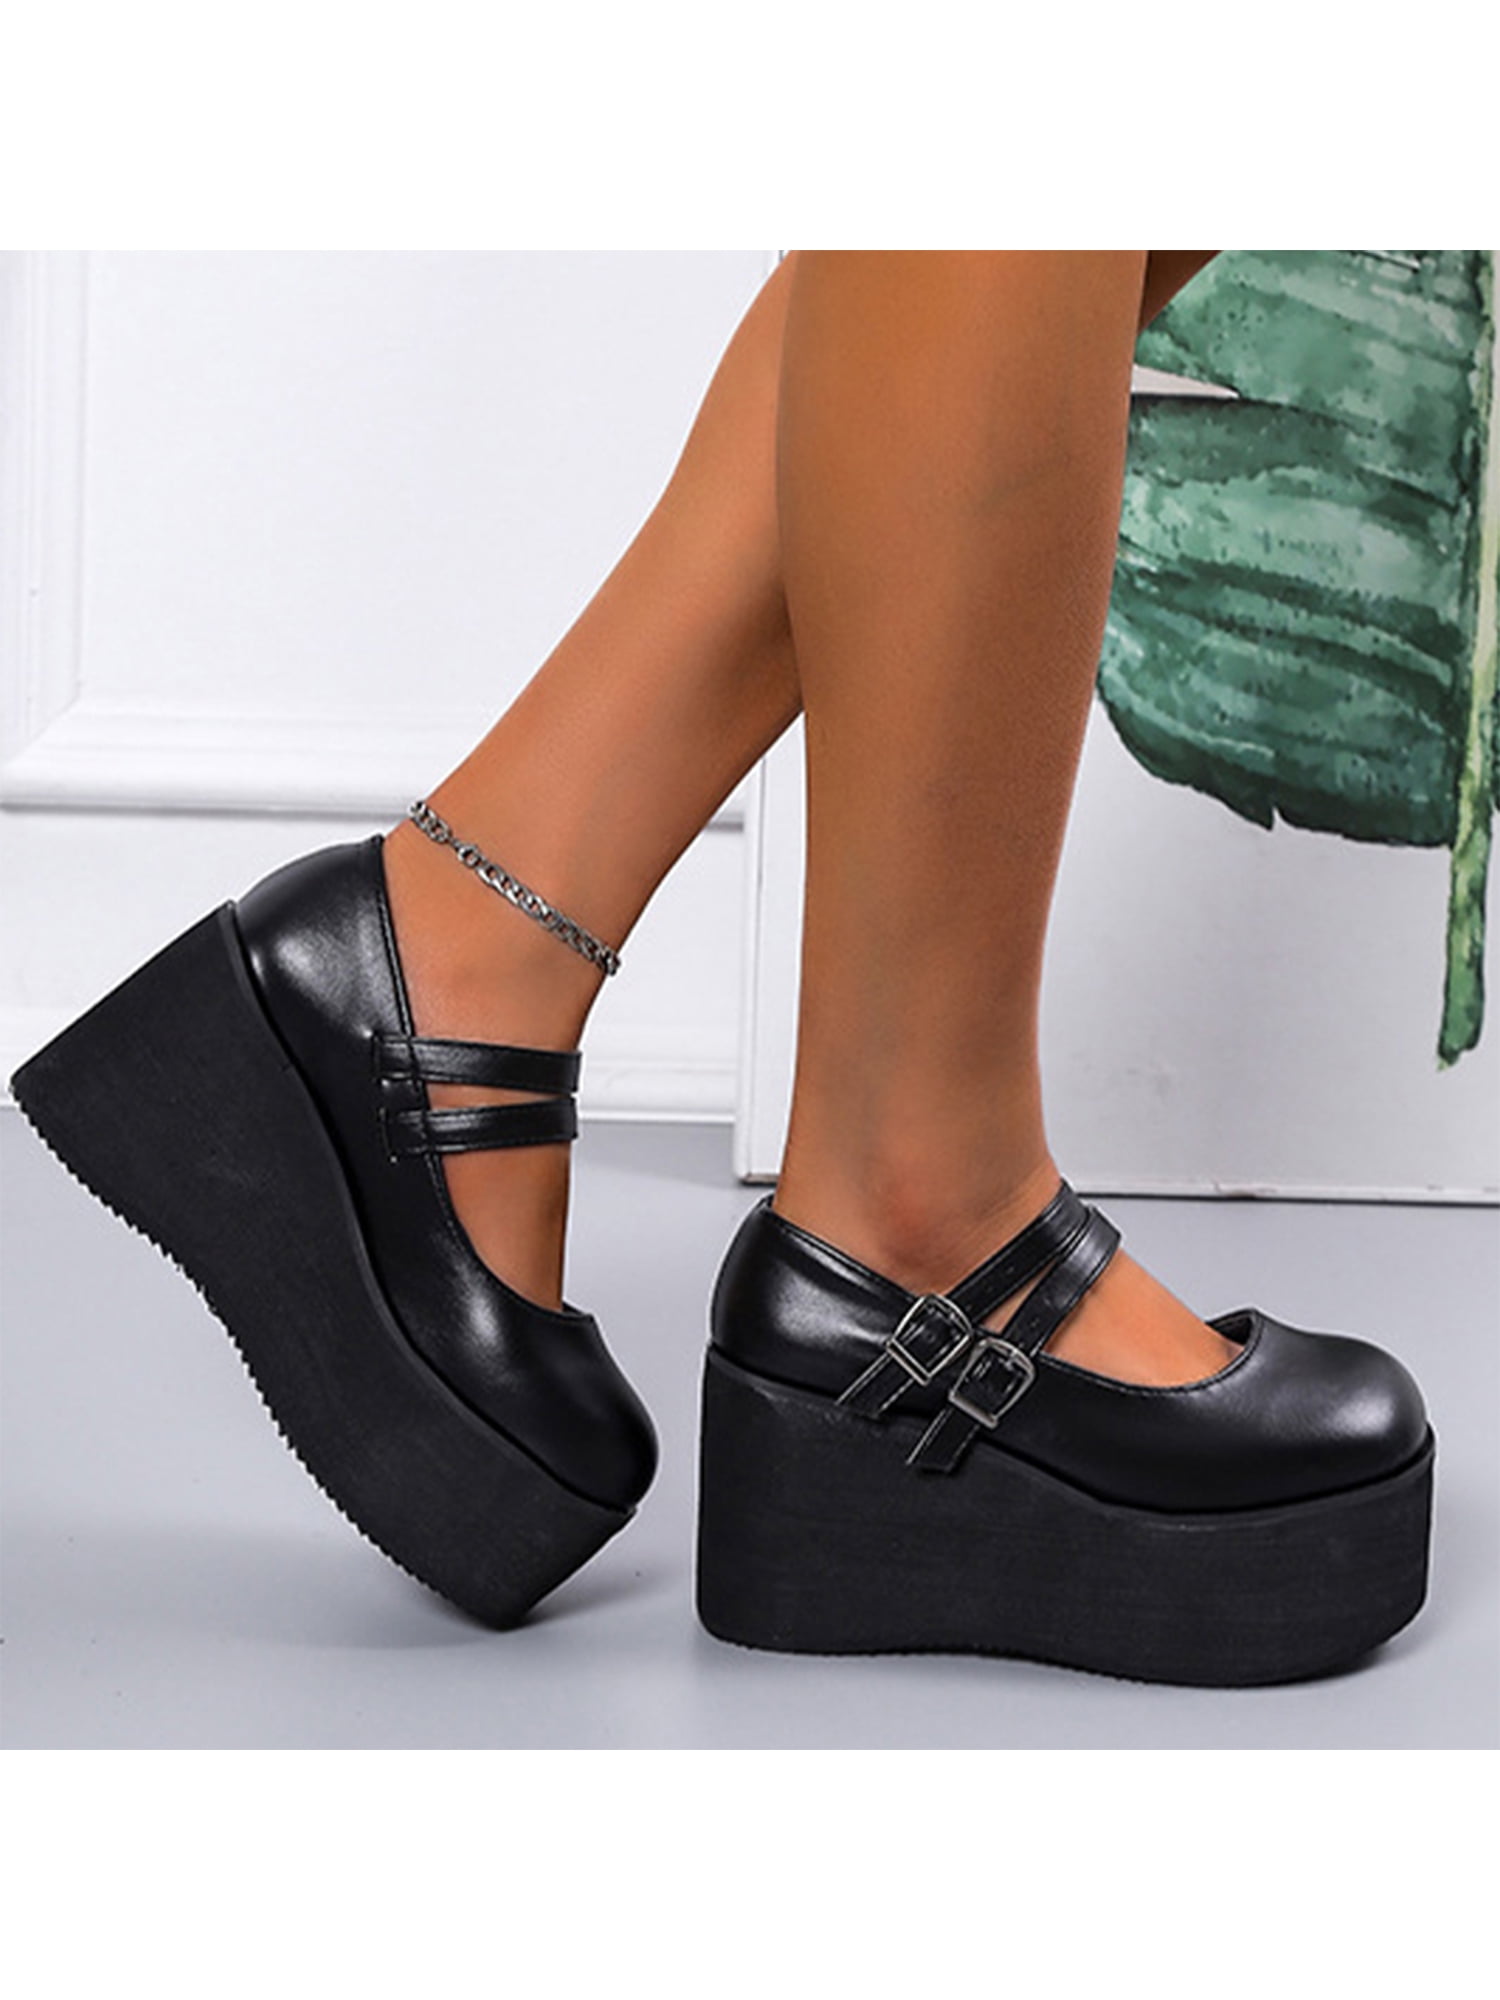  Womens Mary Jane Shoes Gothic Shoes Oxford Dress Shoes Round  Toe Ankle Strap Platform Chunky Heel Pumps Shoes | Pumps